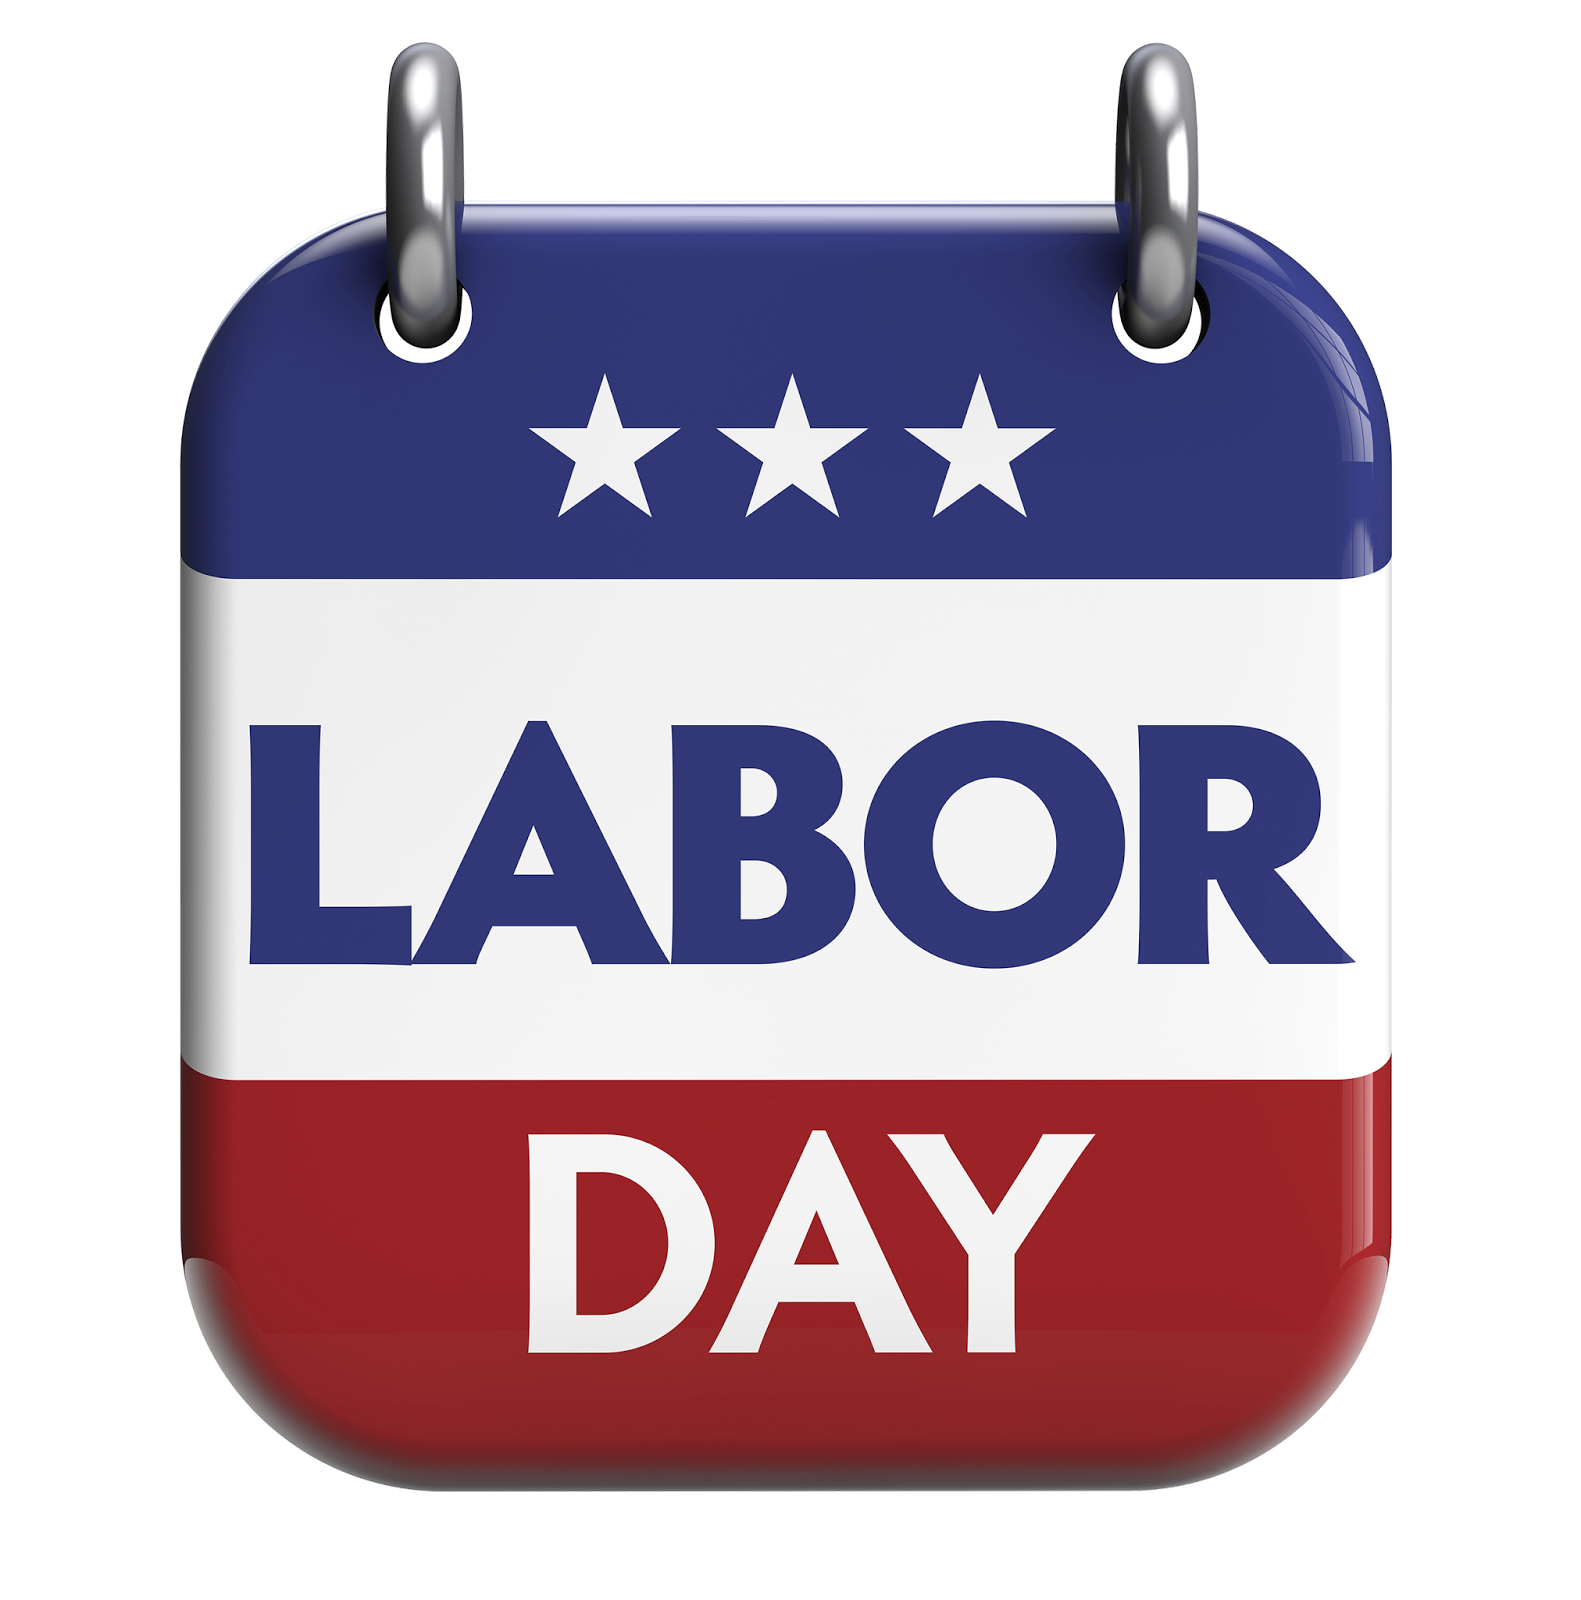 Labor Day United States of America Clip art Image Holiday Labor day